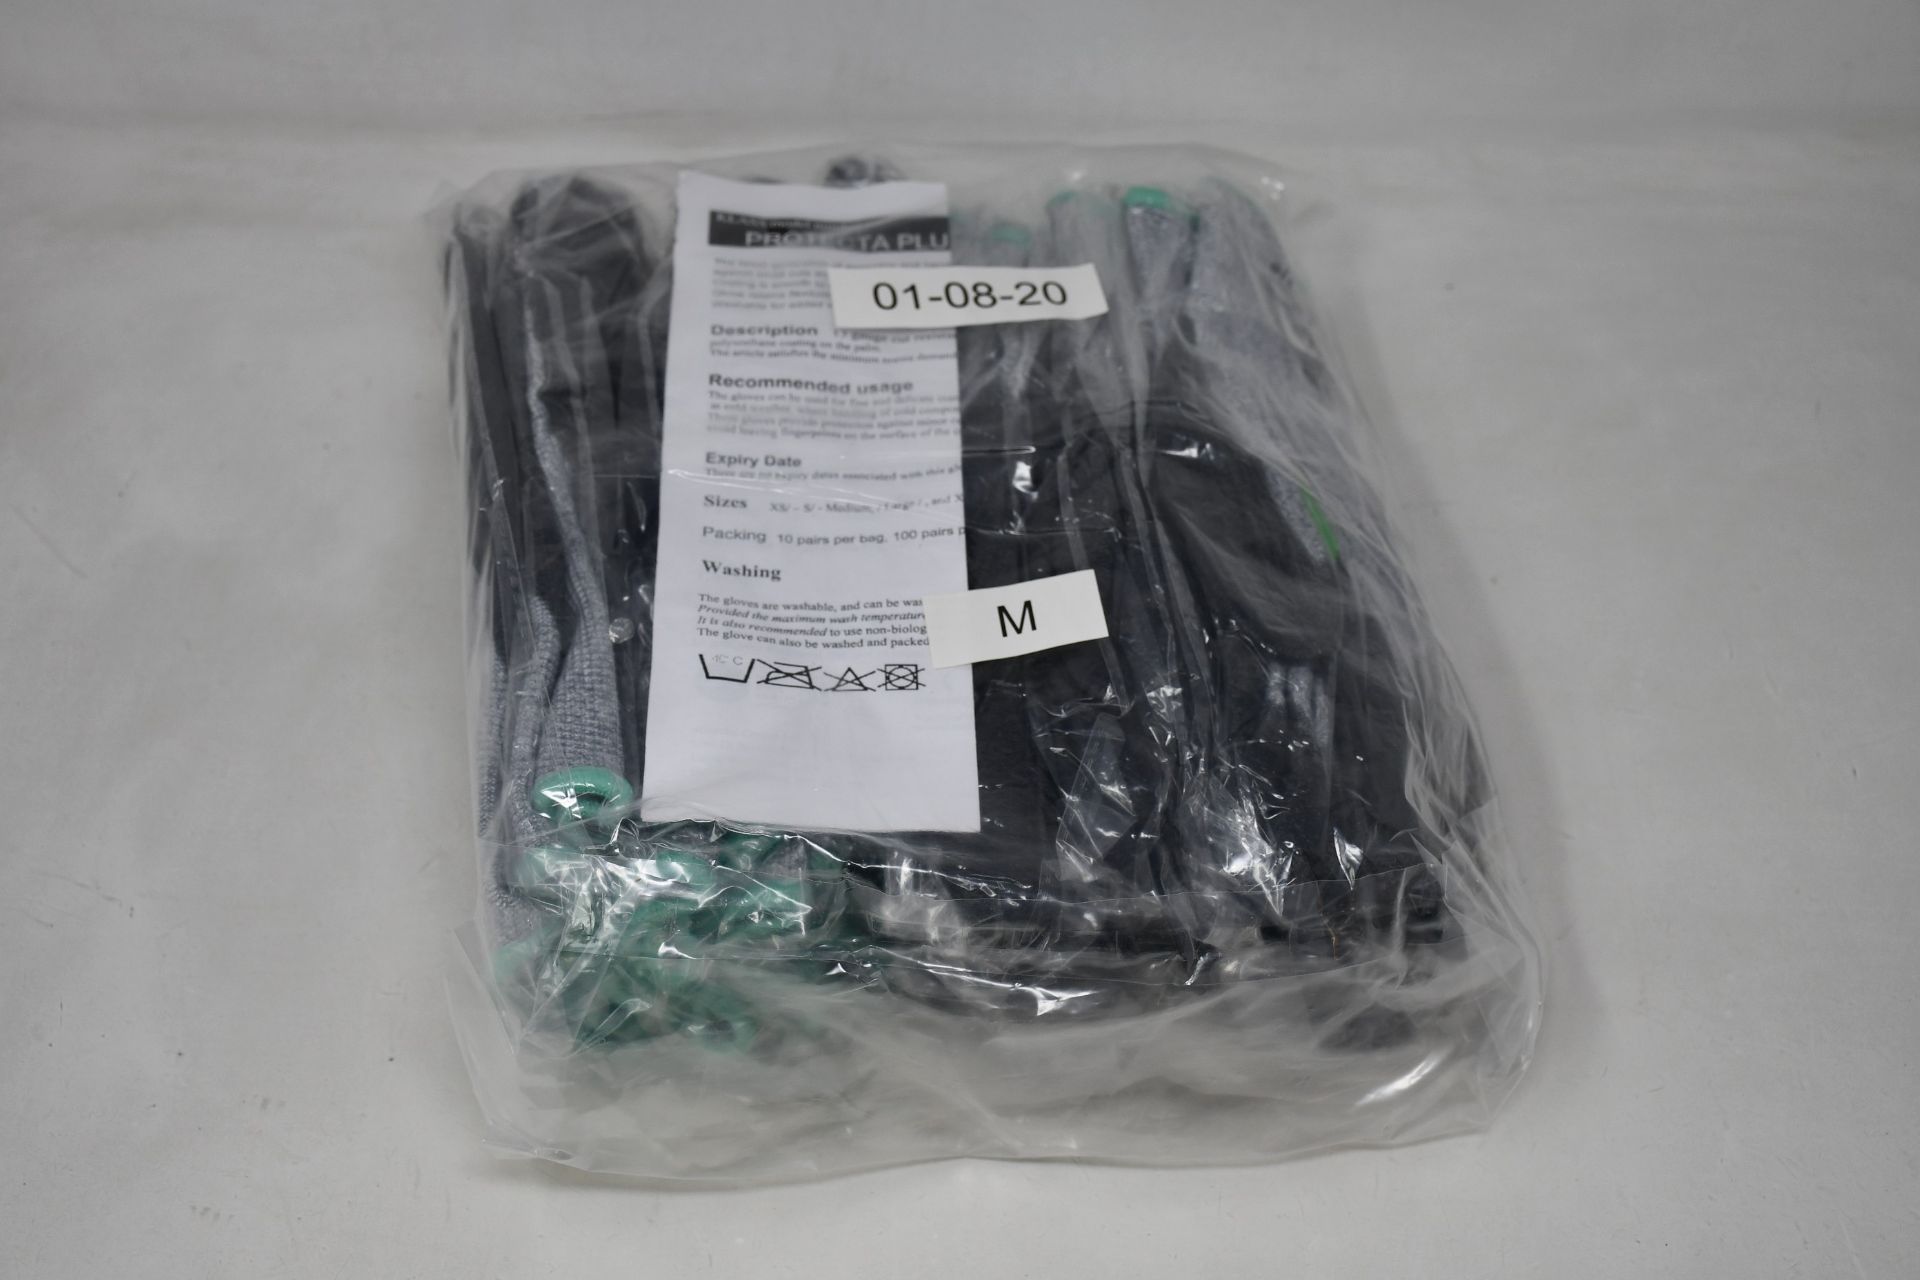 One hundred pairs of as new Klass Protecta Plus EXtreme 4543F M/8 thumb crotch safety gloves.